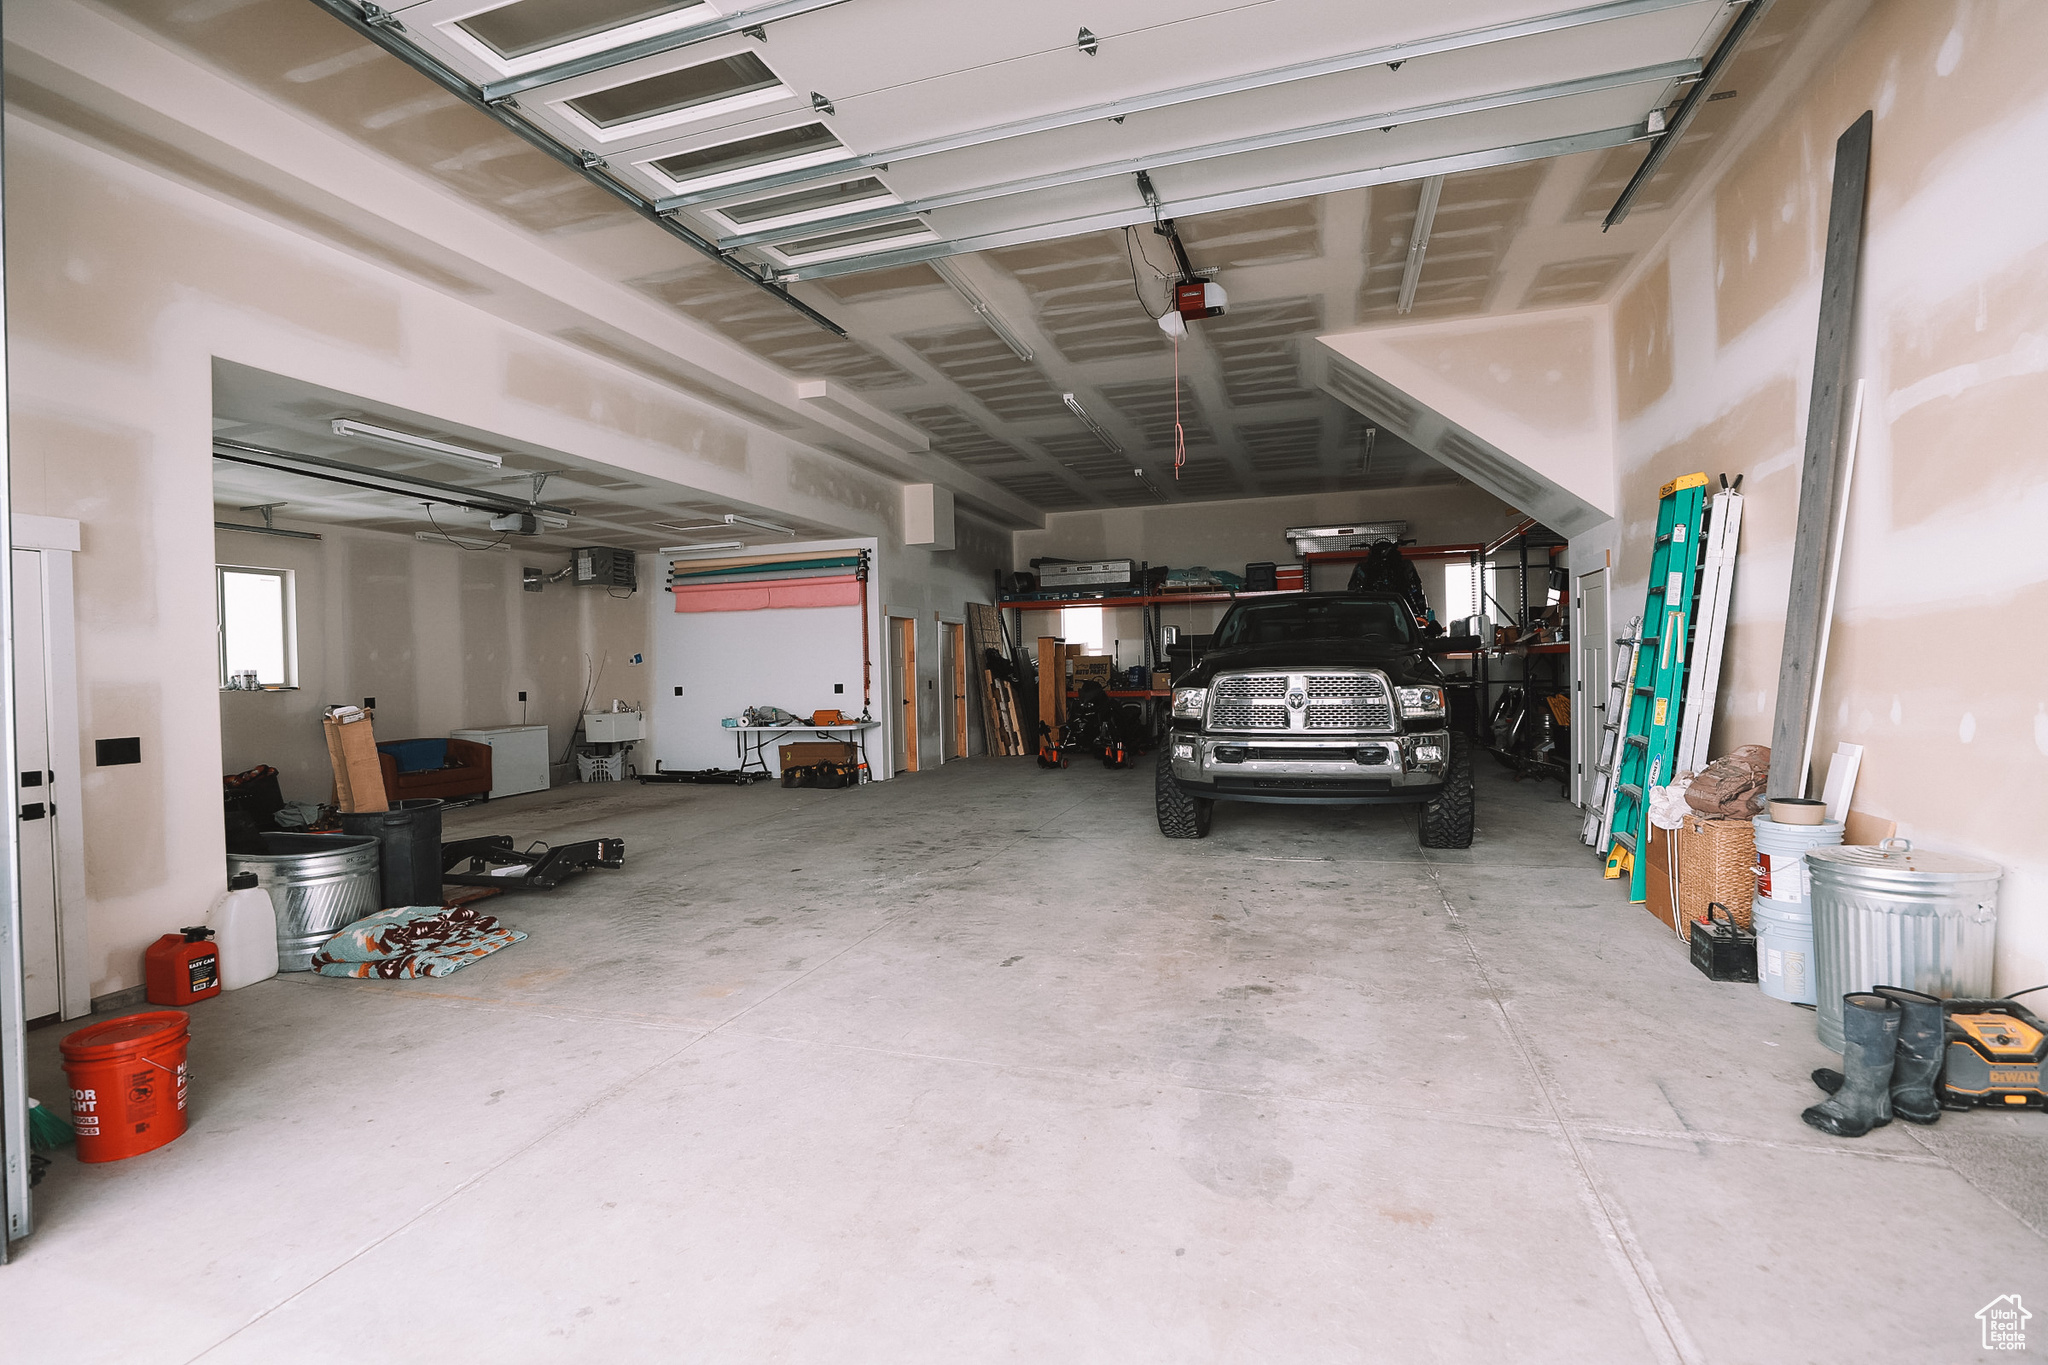 Extensive 5 car garage, wired for a auto lift.